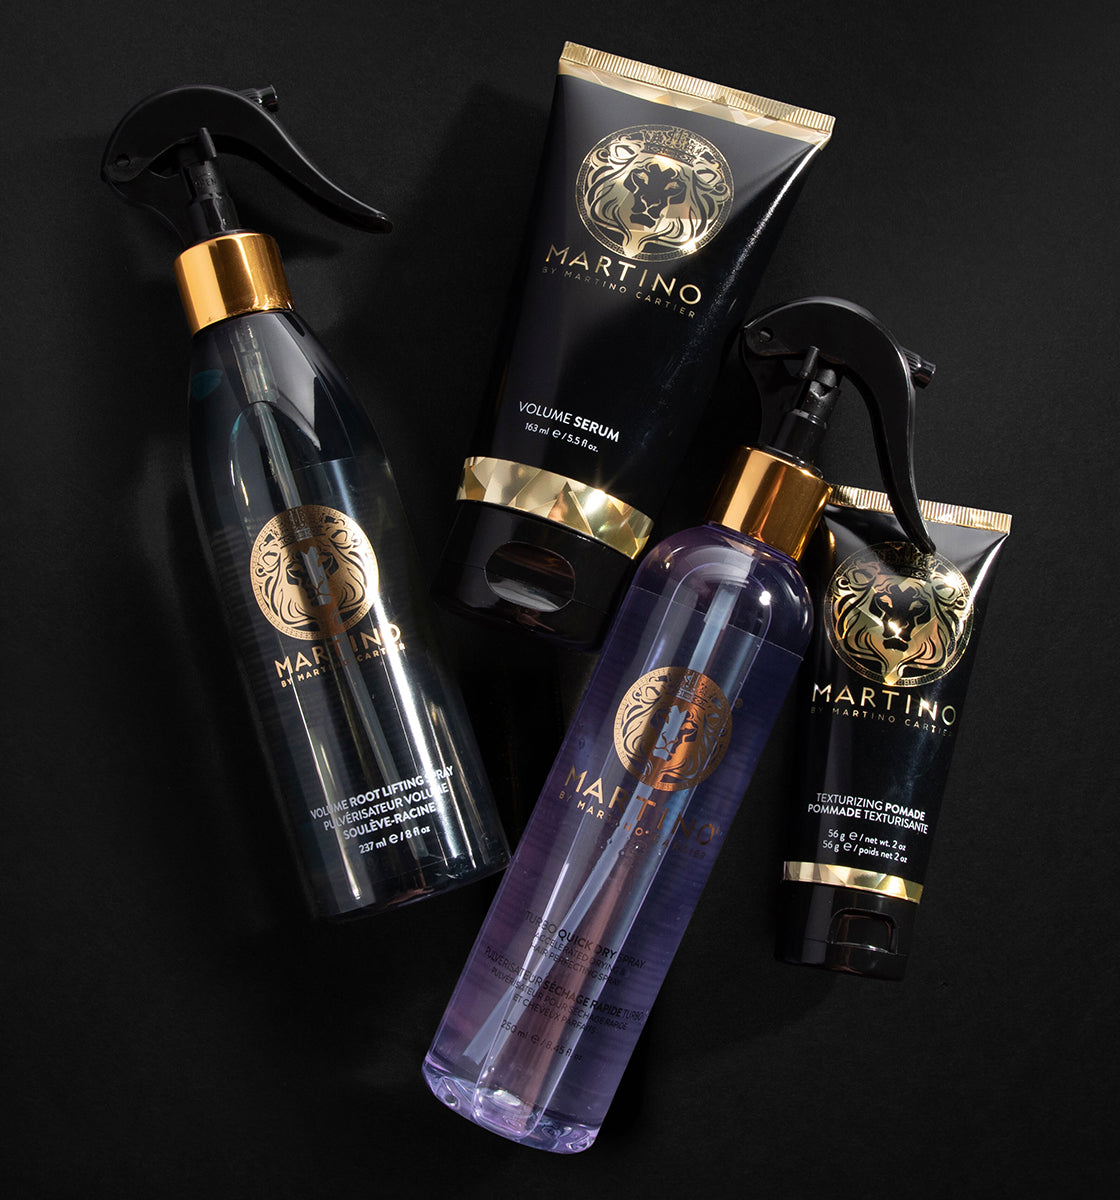 martino cartier hair products